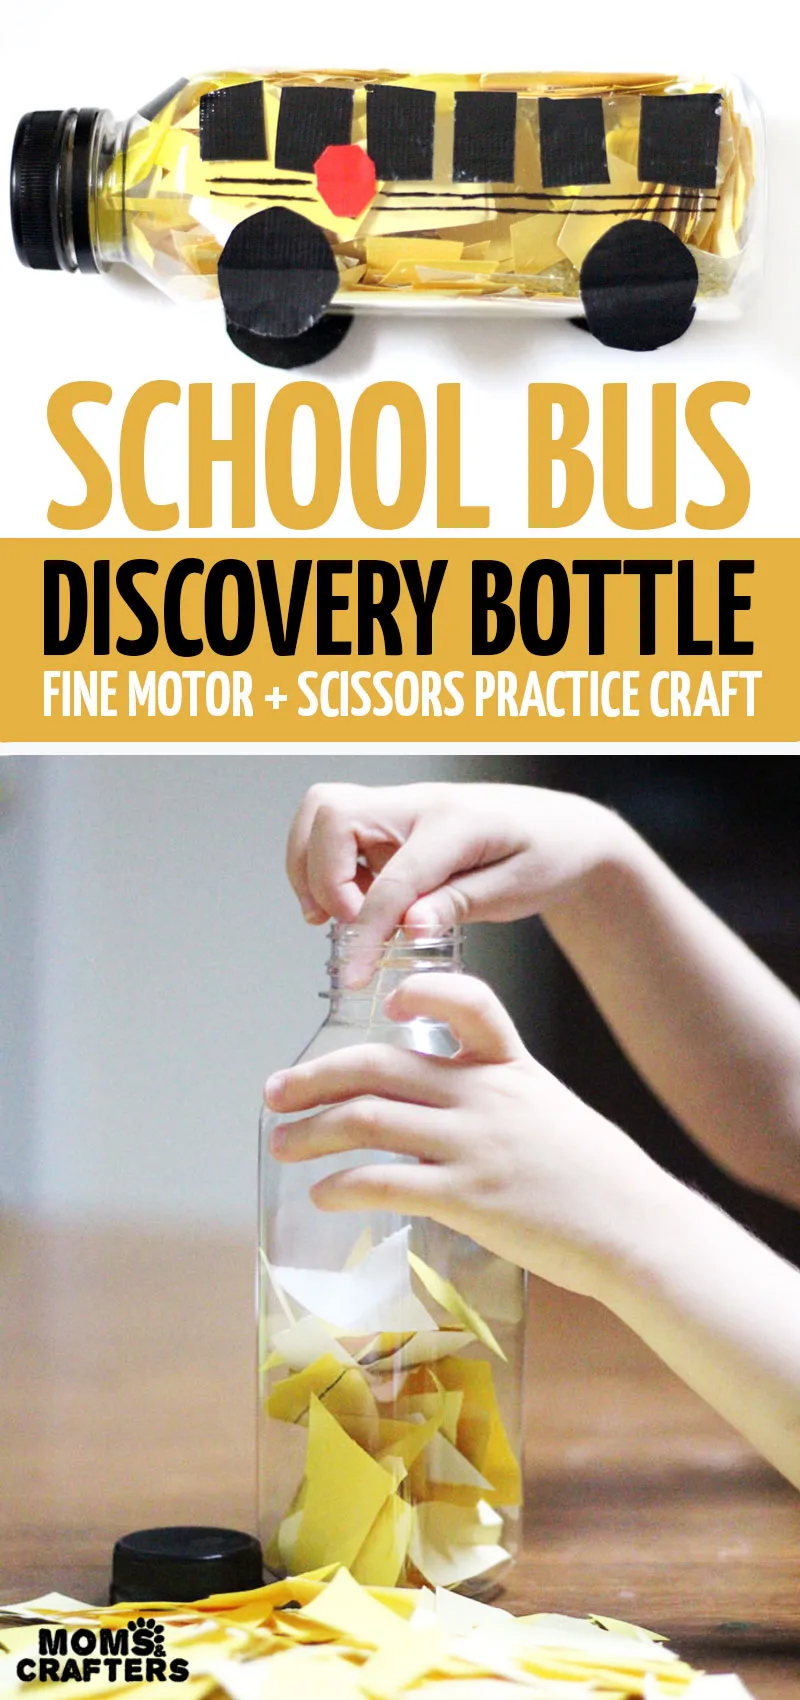 Click for a sweet tutorial on how to make a school bus discovery bottle - a great kindergarten or preschool preparation activity and scissors skills cutting practice, plus it makes a cool fine motor activity and DIY sensory toy for back to school! You'll love this cool back to school craft for kids. #schoolbus #backtoschool #finemotor